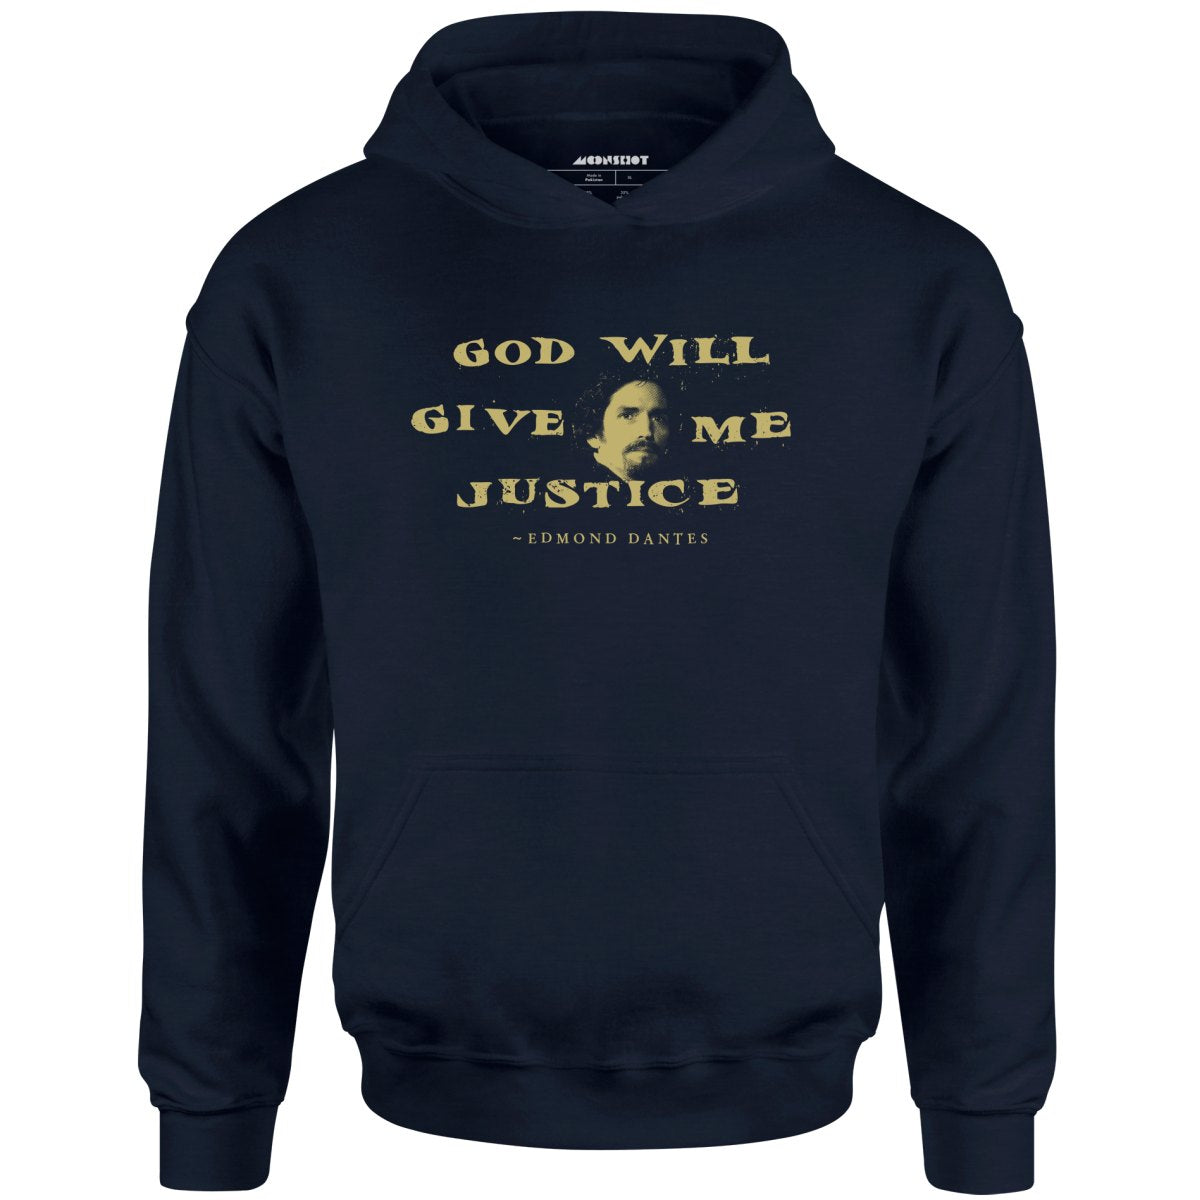 Edmond Dantes - God Will Give Me Justice - Unisex Hoodie